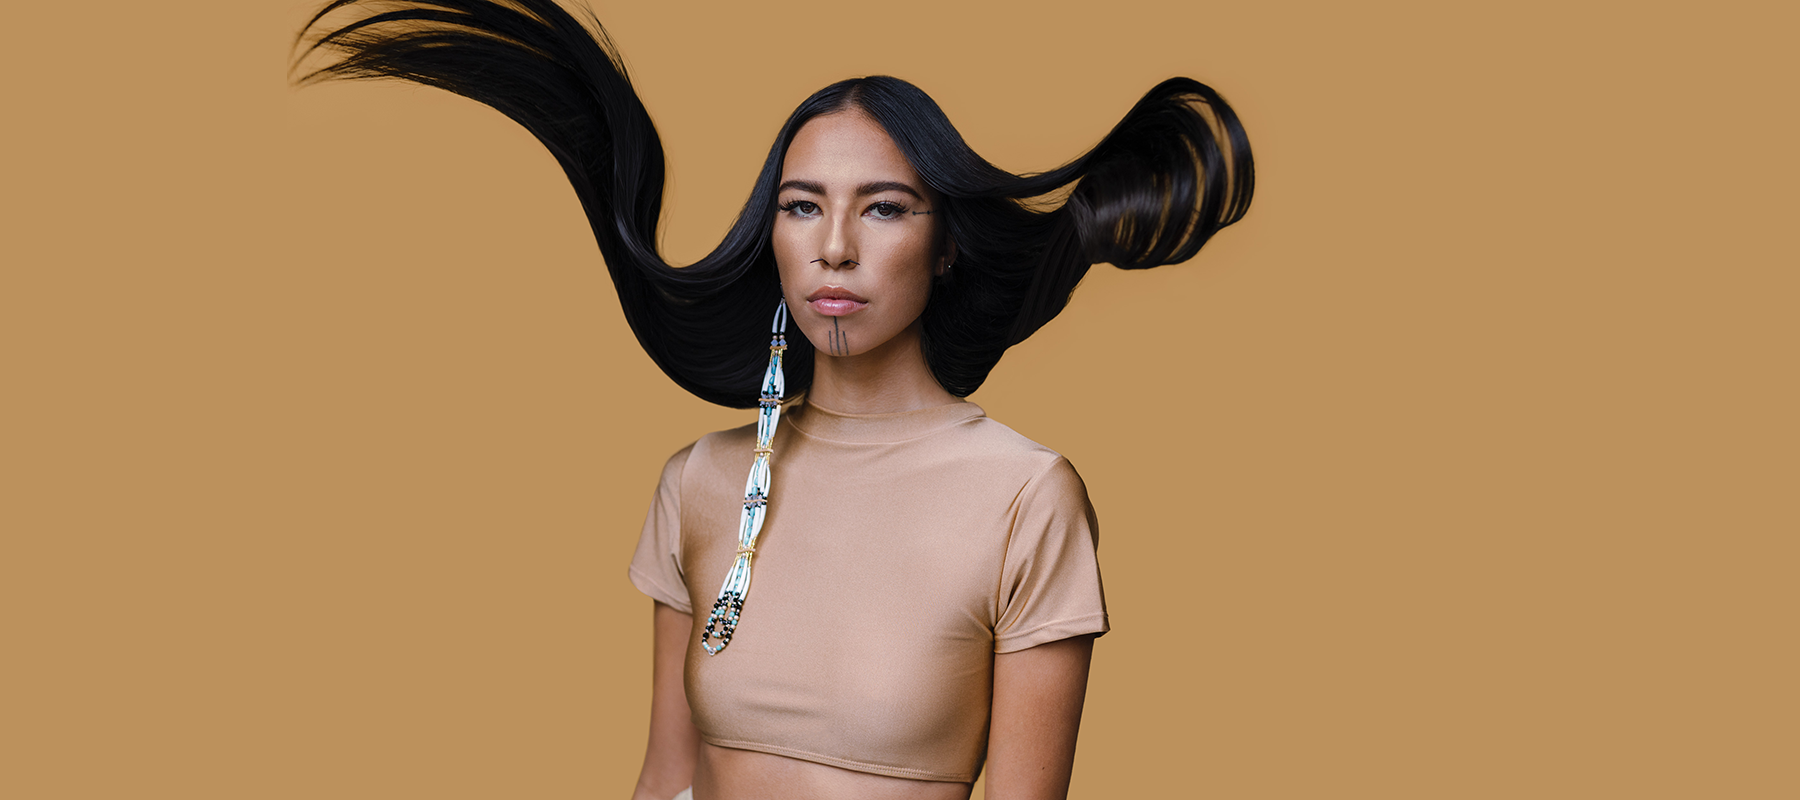 Paul Mitchell ICONIC-Kampagne mit Quannah Chasinghorse